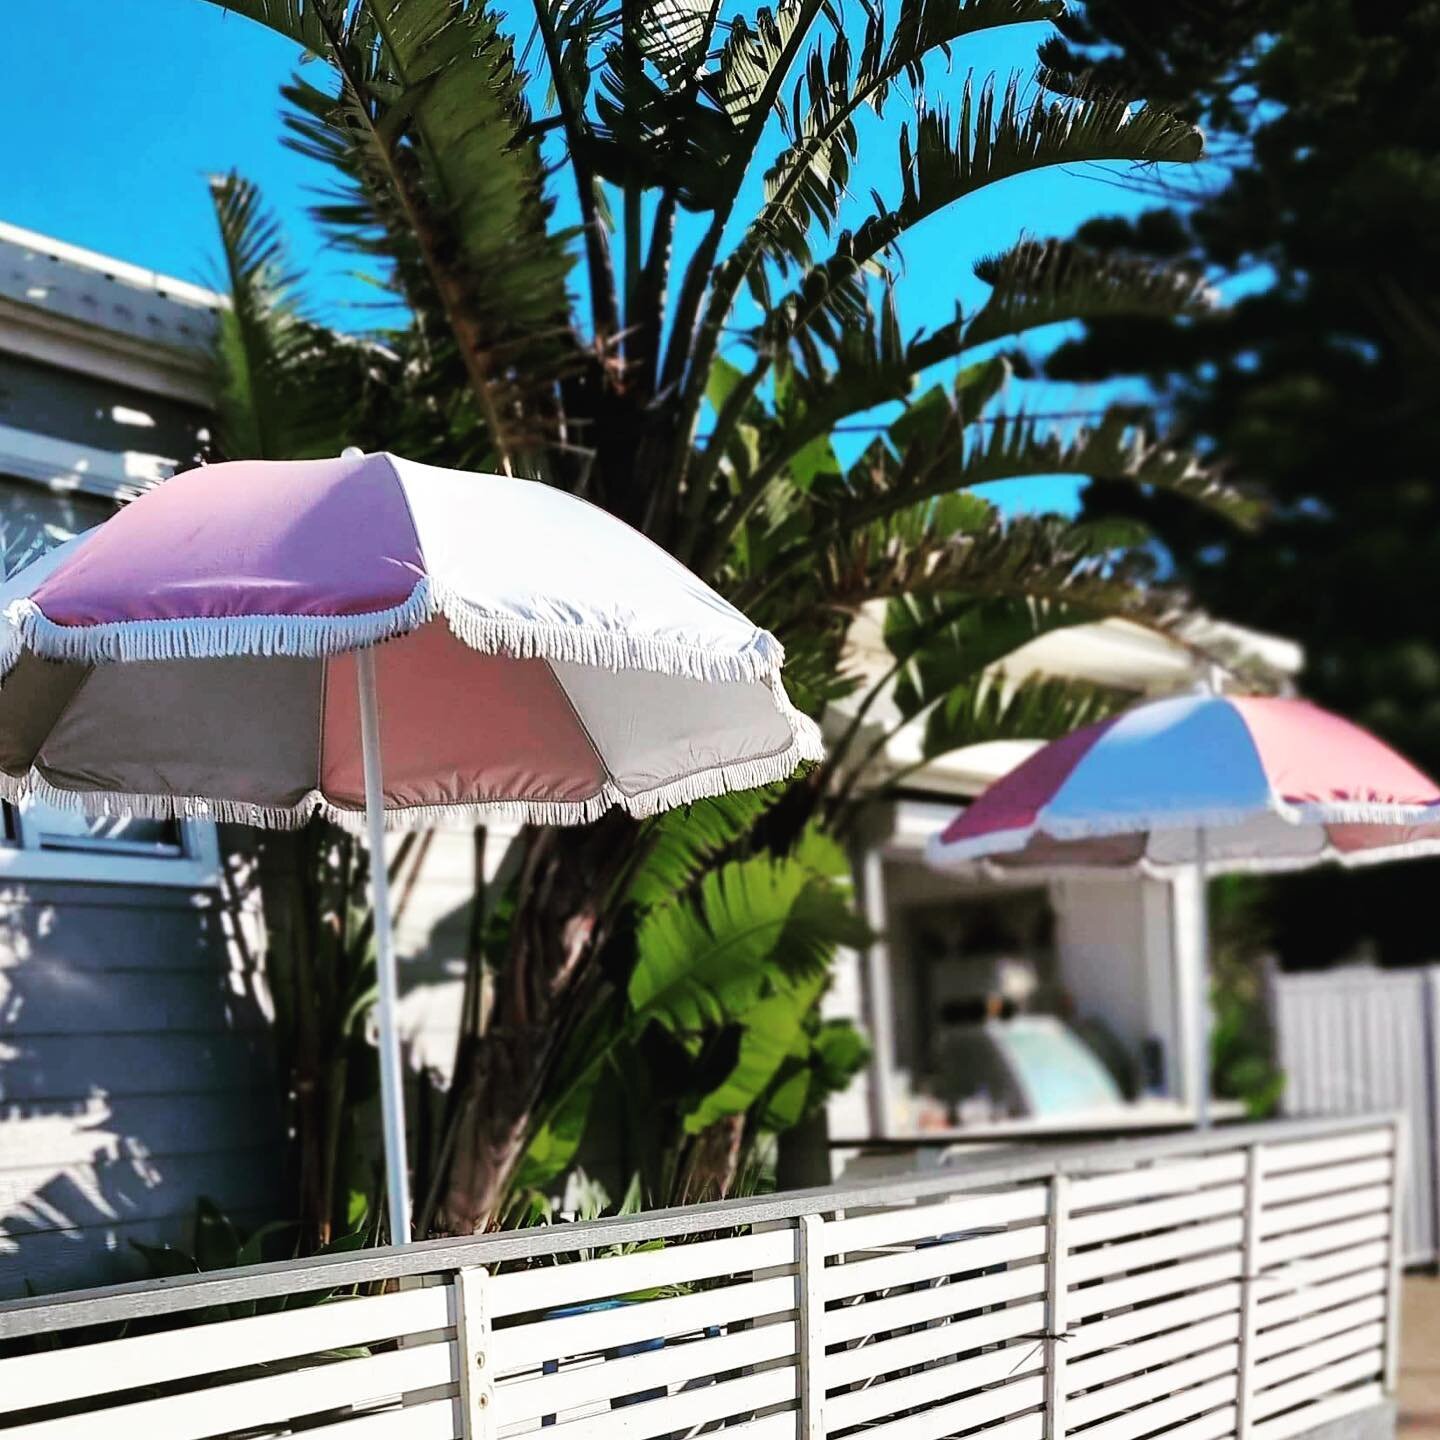 AUGUST TRADING UPDATE
Whilst the main venue will be closed through August, the Beach Kiosk is trading 7 days from 6am.
.
.
.
#margaritadaze #uminabeach #loveumina #icecream #coffee #toasties #takehomecocktails